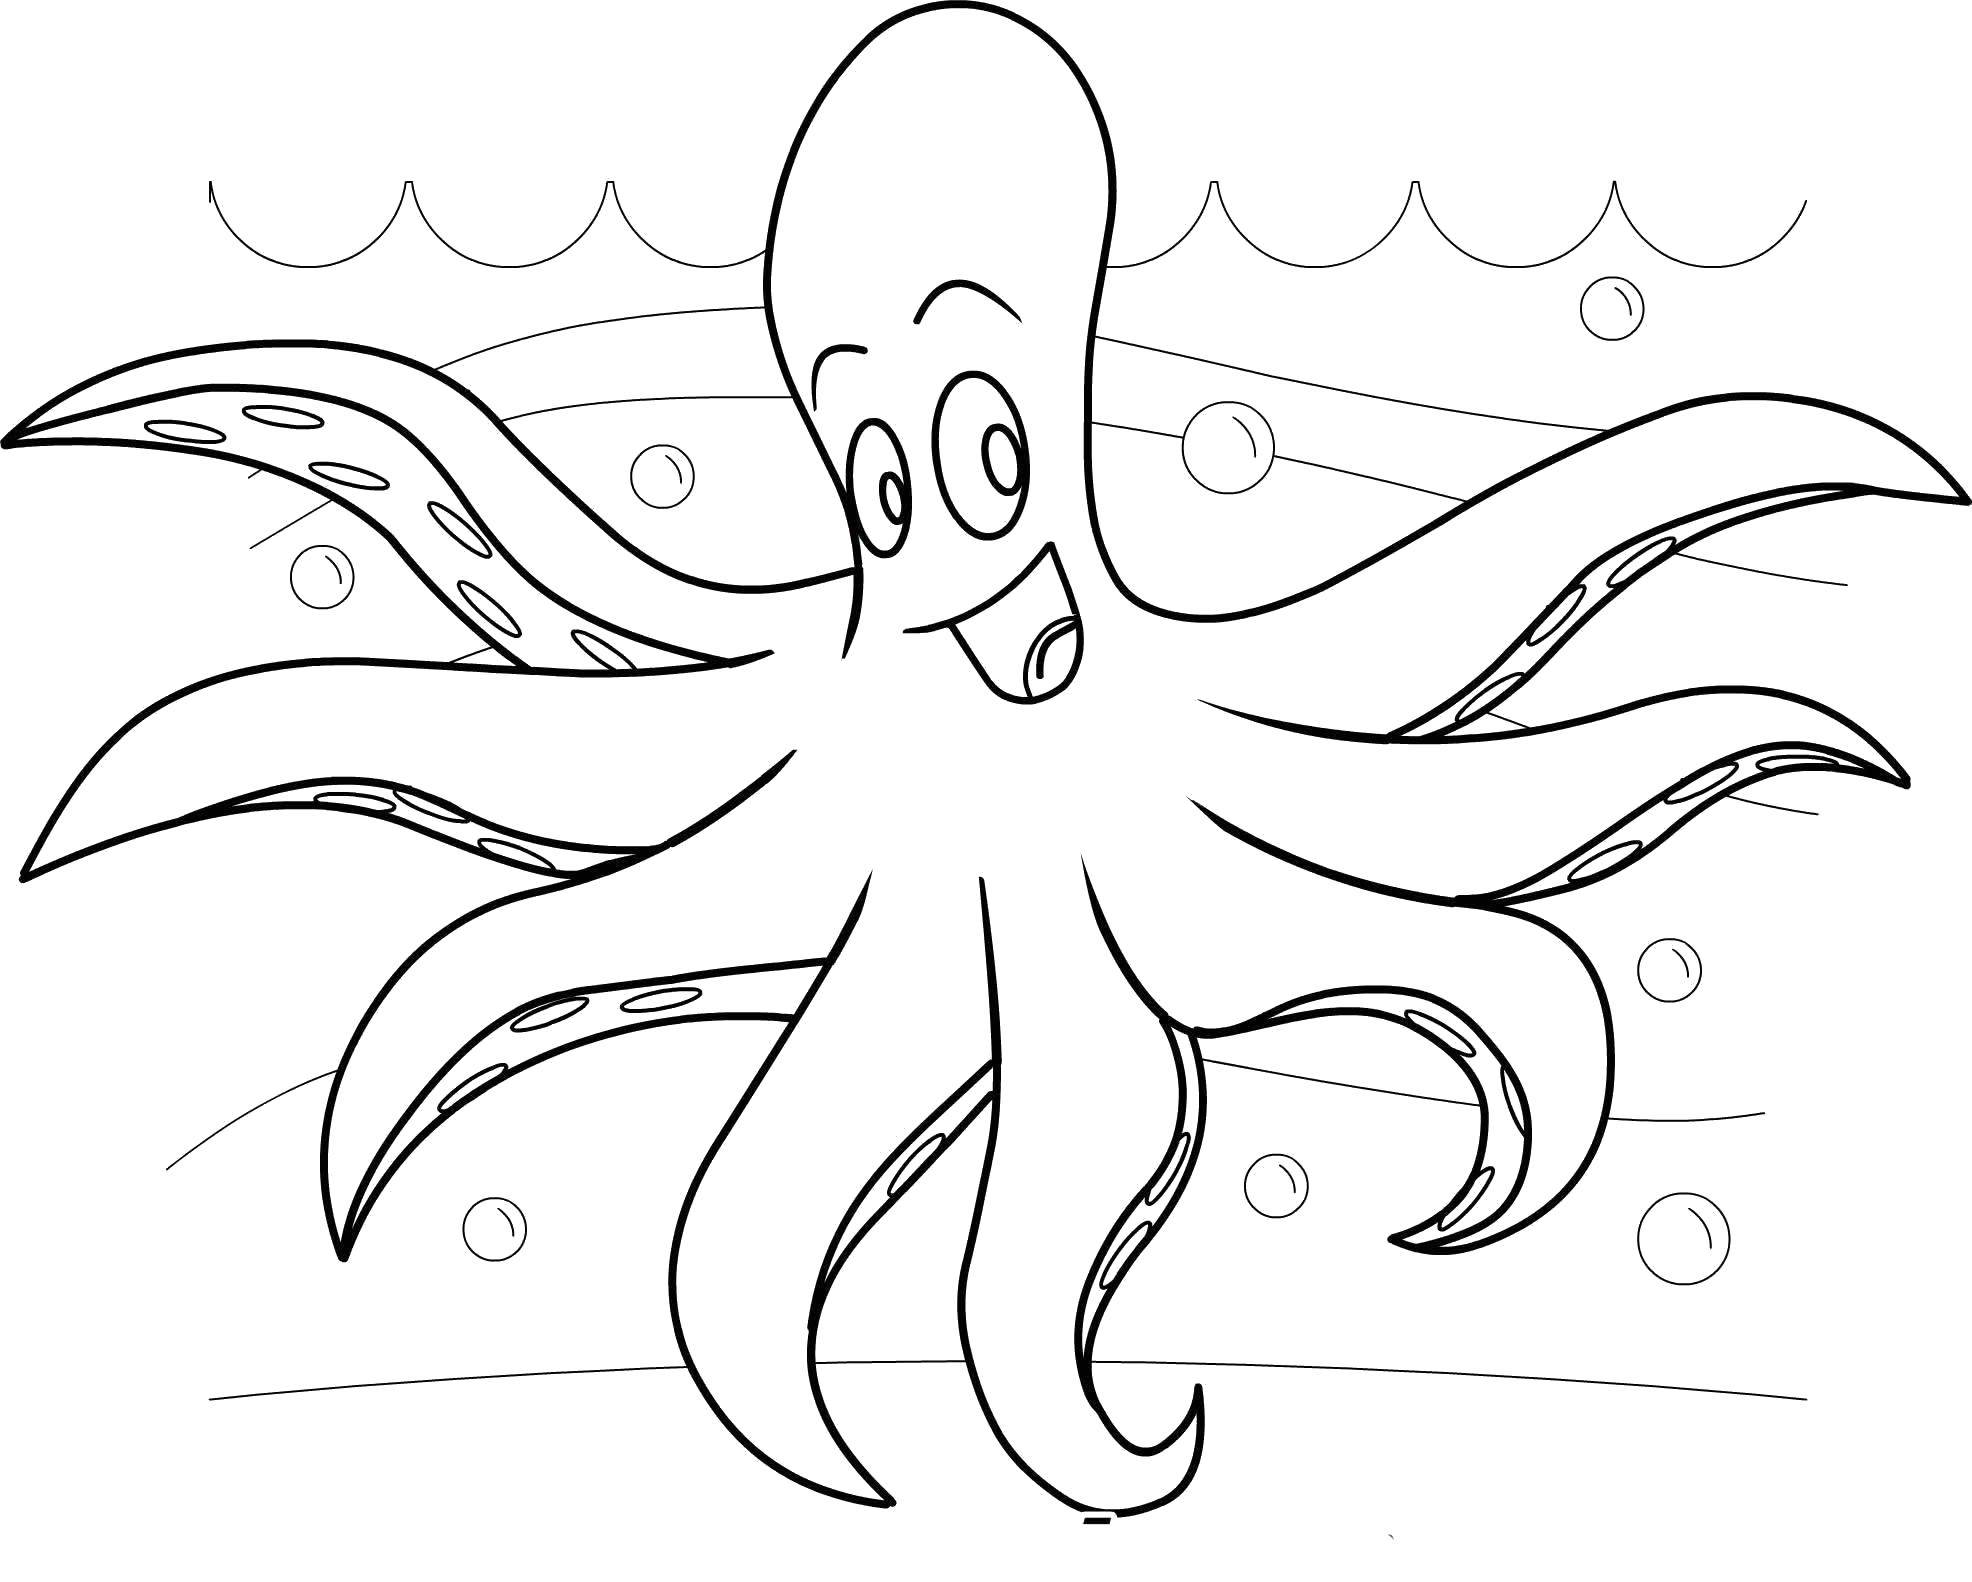 Coloring Happy Octopussy. Category Marine animals. Tags:  Underwater world, octopus.